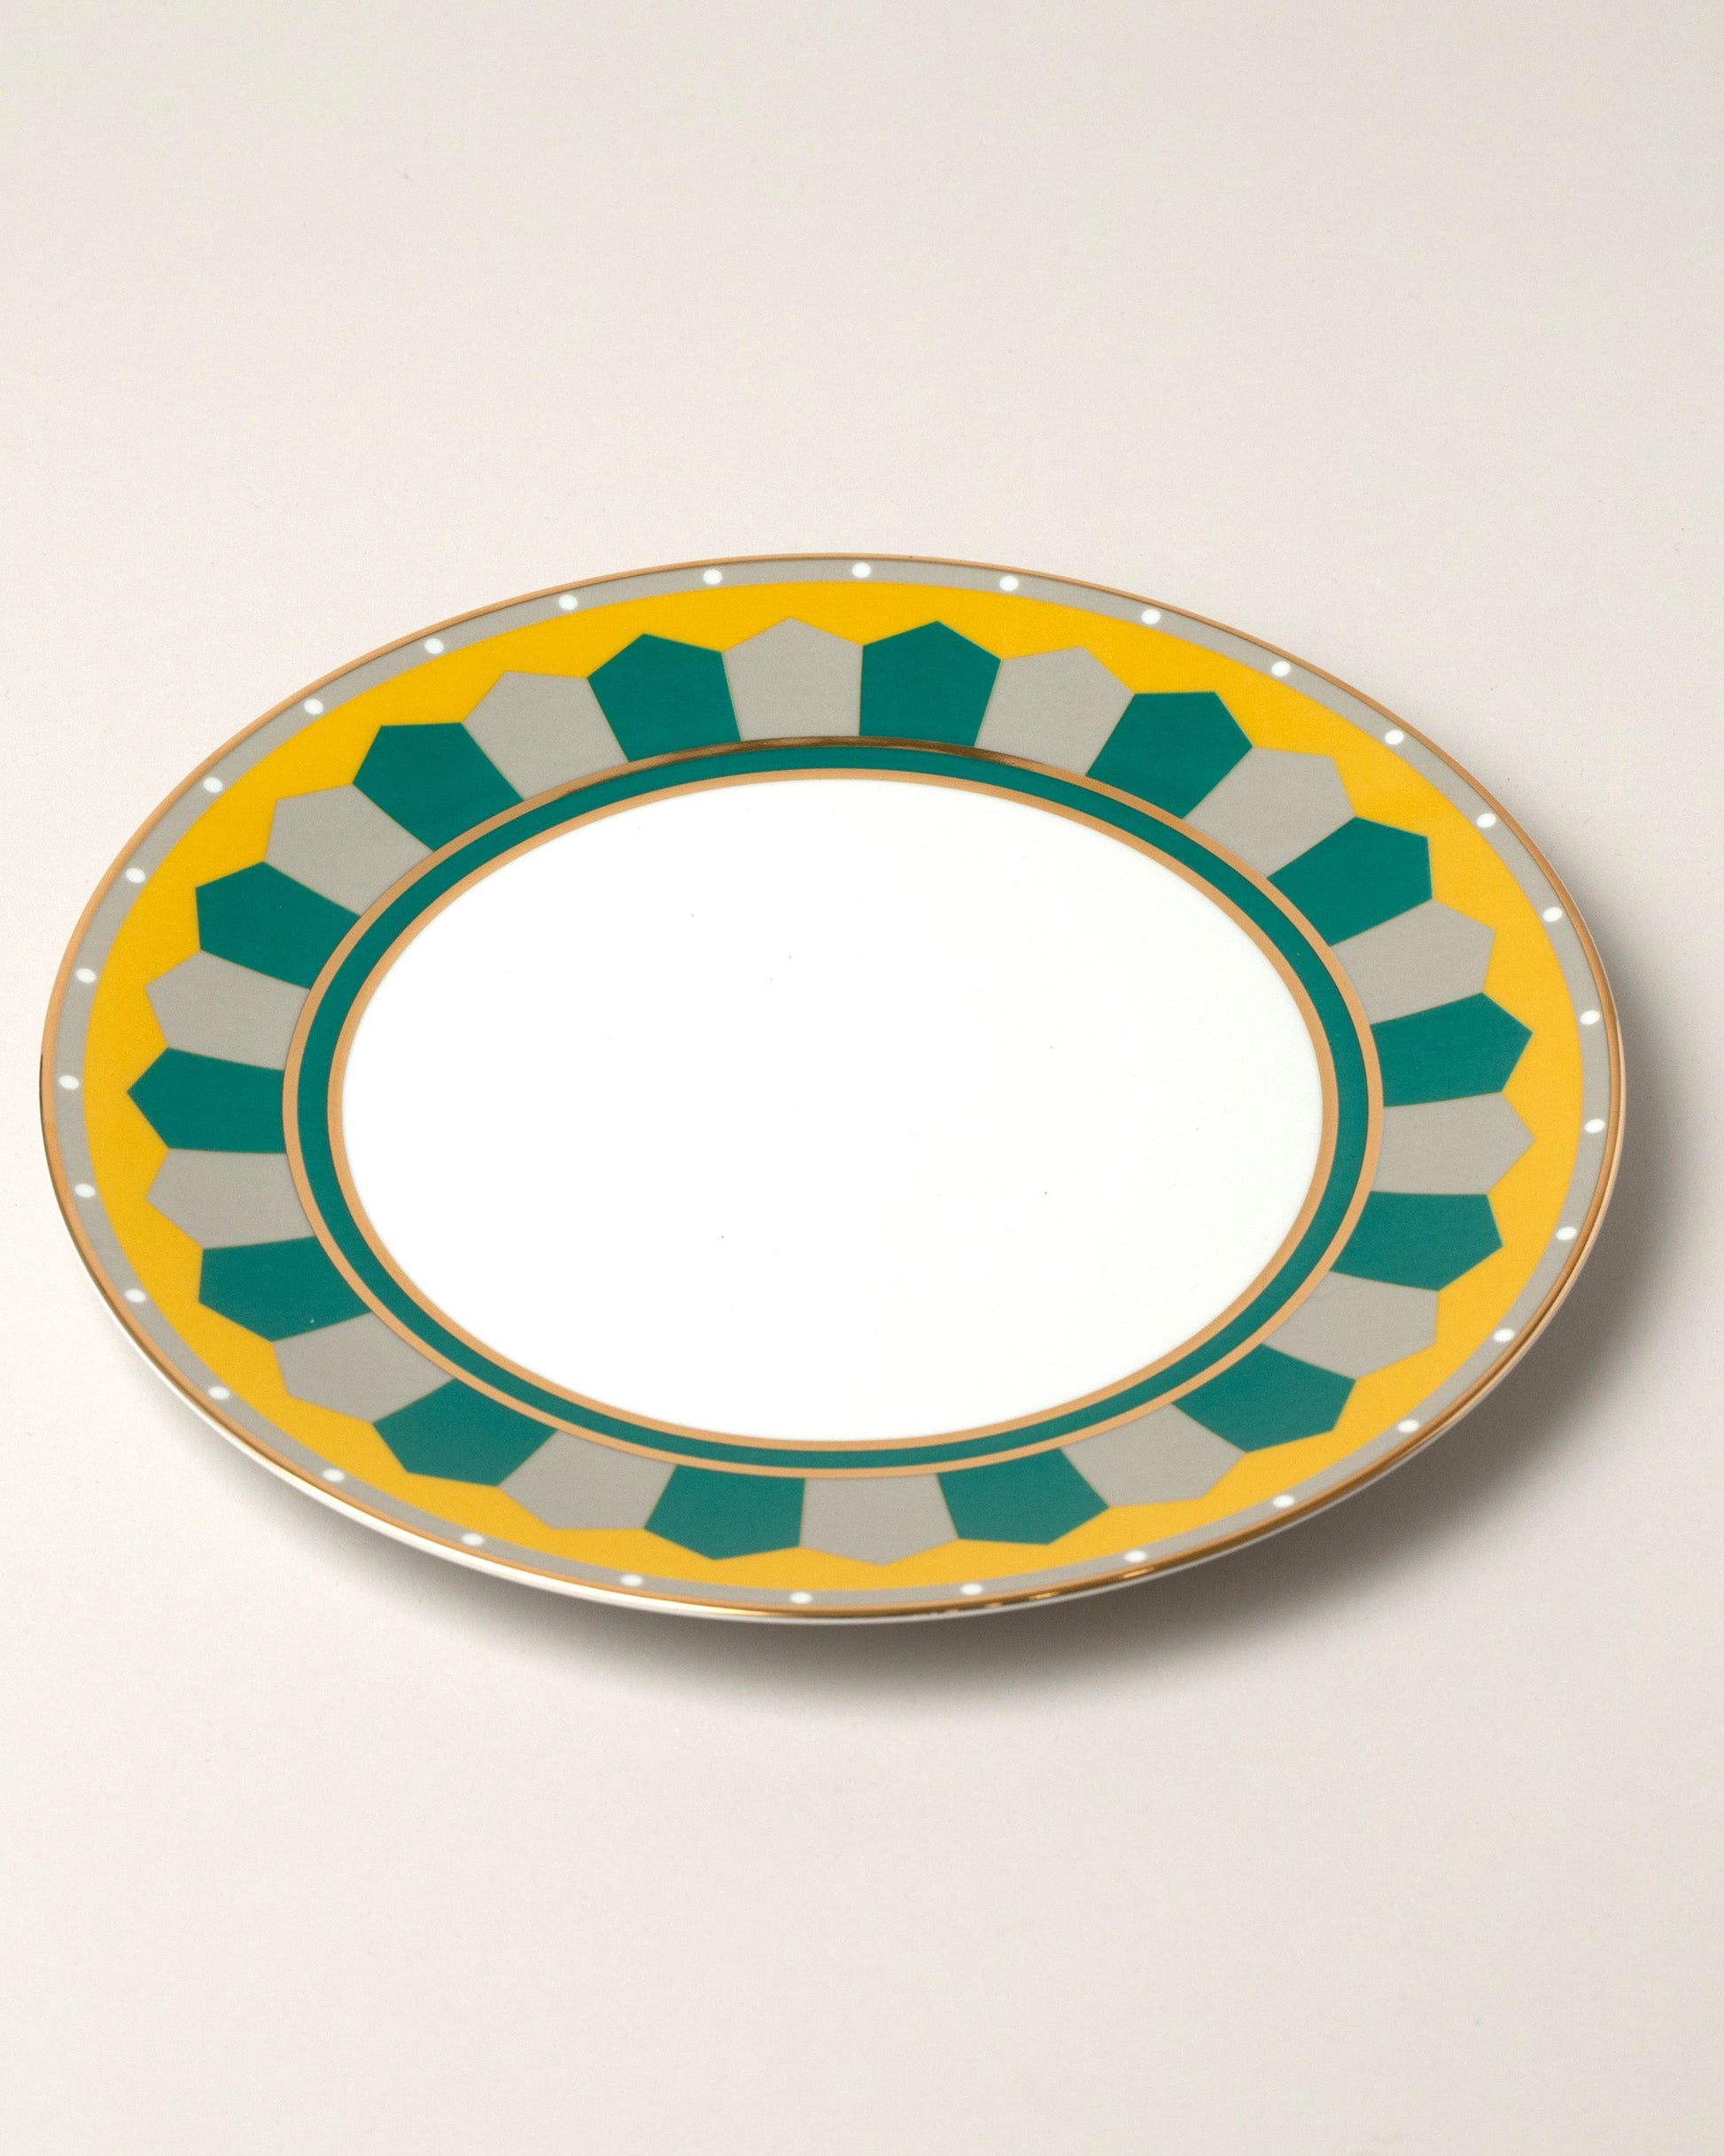  Lagos Dinner Plates on light color background.